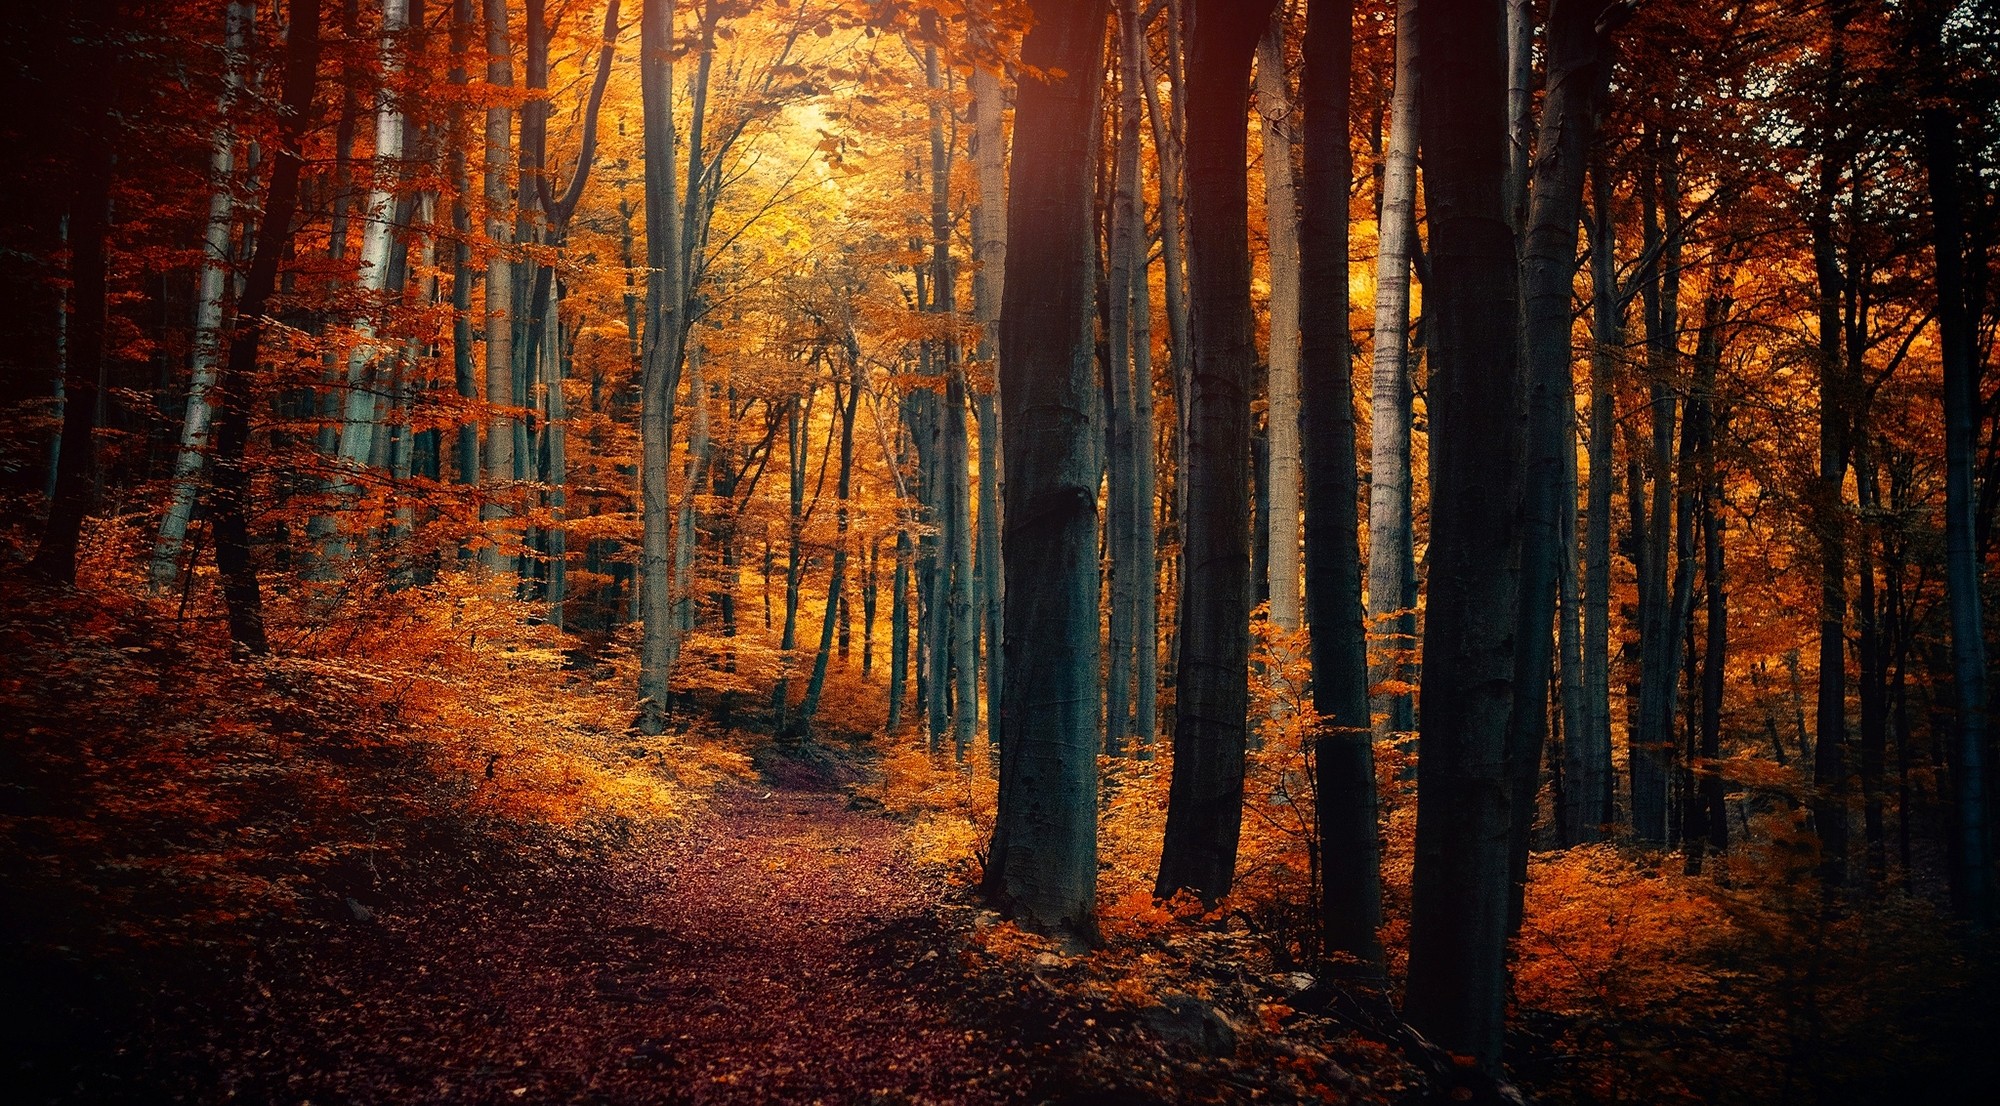 Wallpapers array an forest autumn atmosphere on the desktop